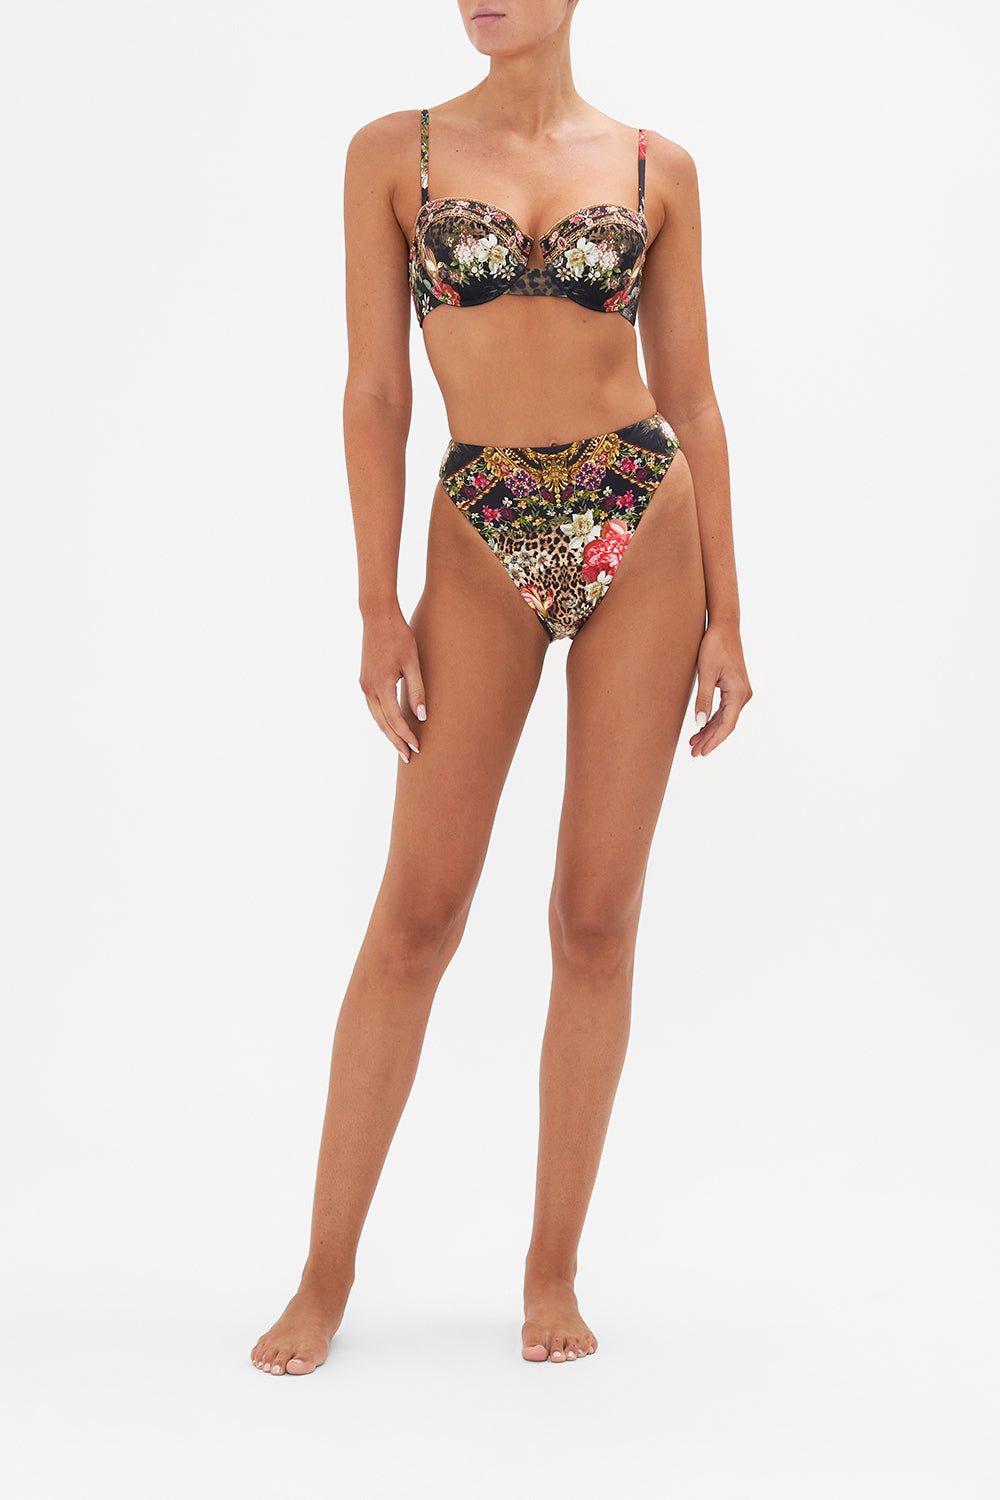 Front view of model wearing CAMILLA floral high waist bikini bottom in A Night At The Opera print